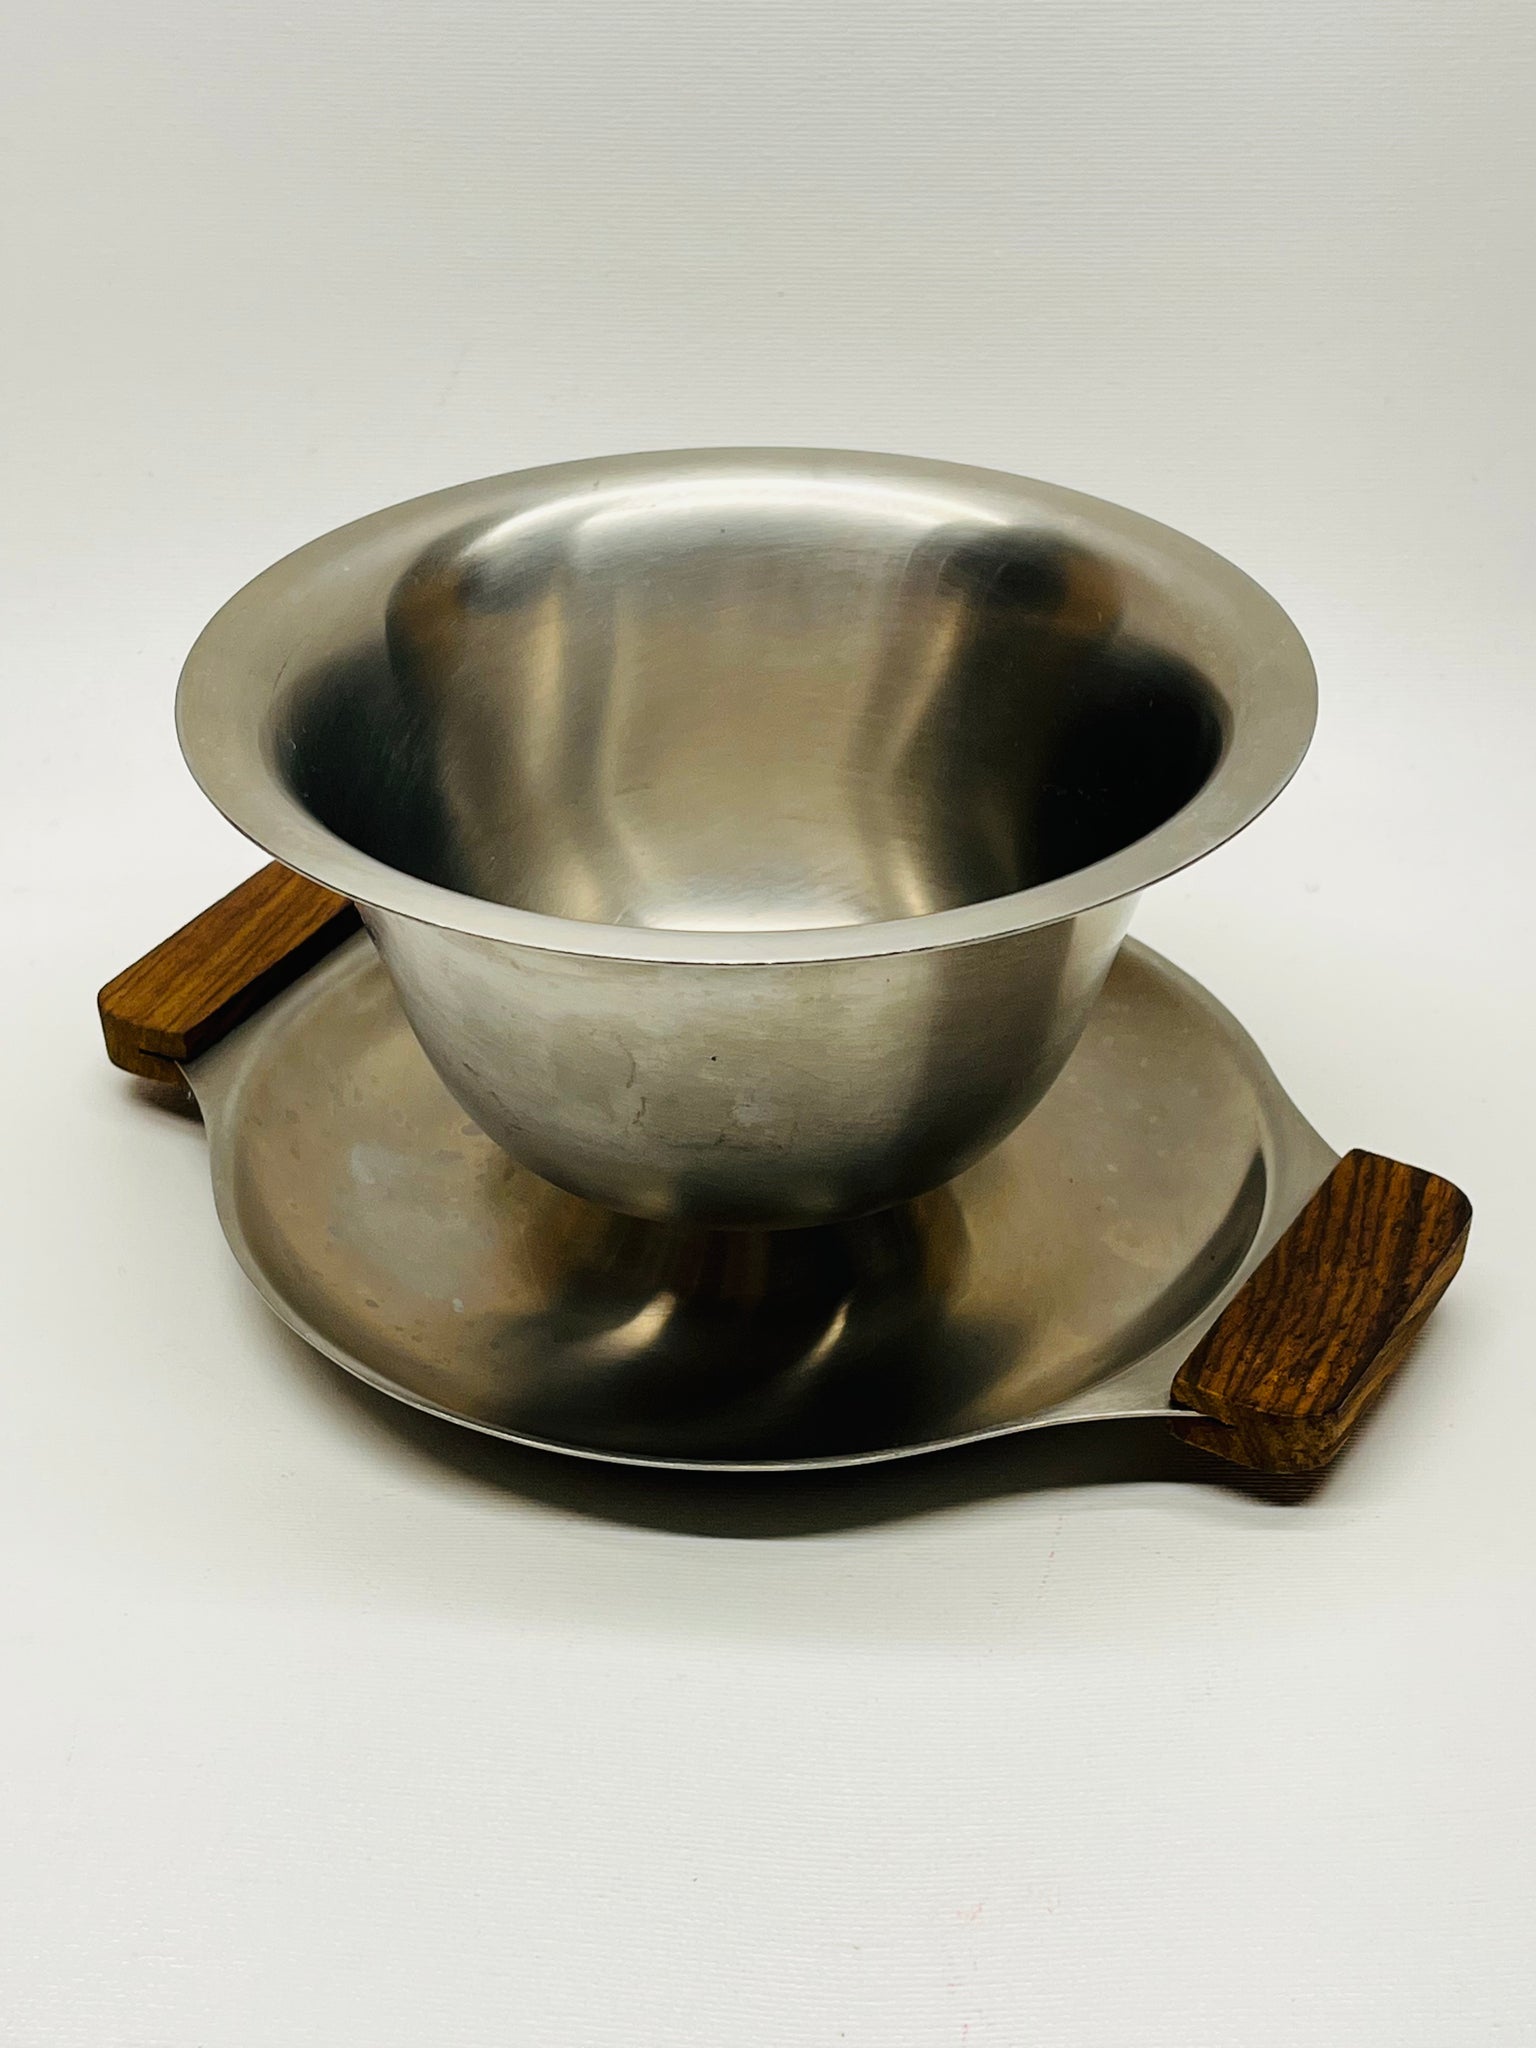 Stainless Steel Bowl with handles